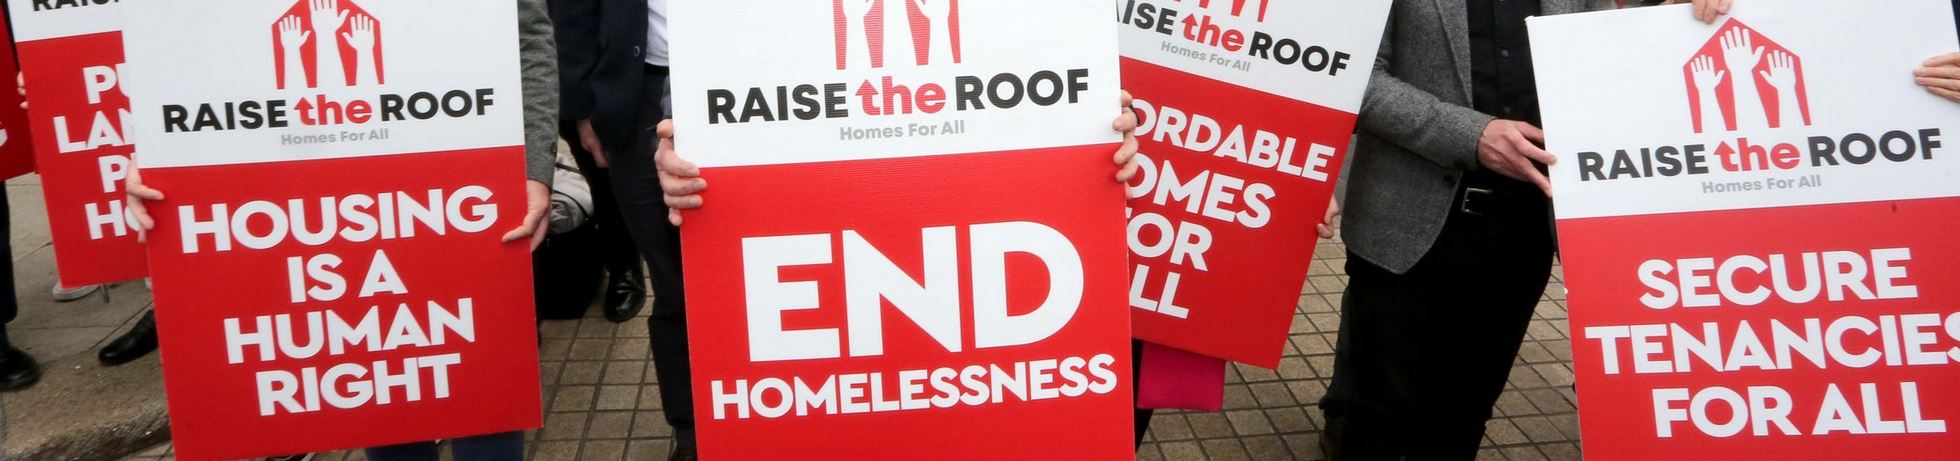 Posters saying end homelessness, raise the roof, for a rally on the housing crisis